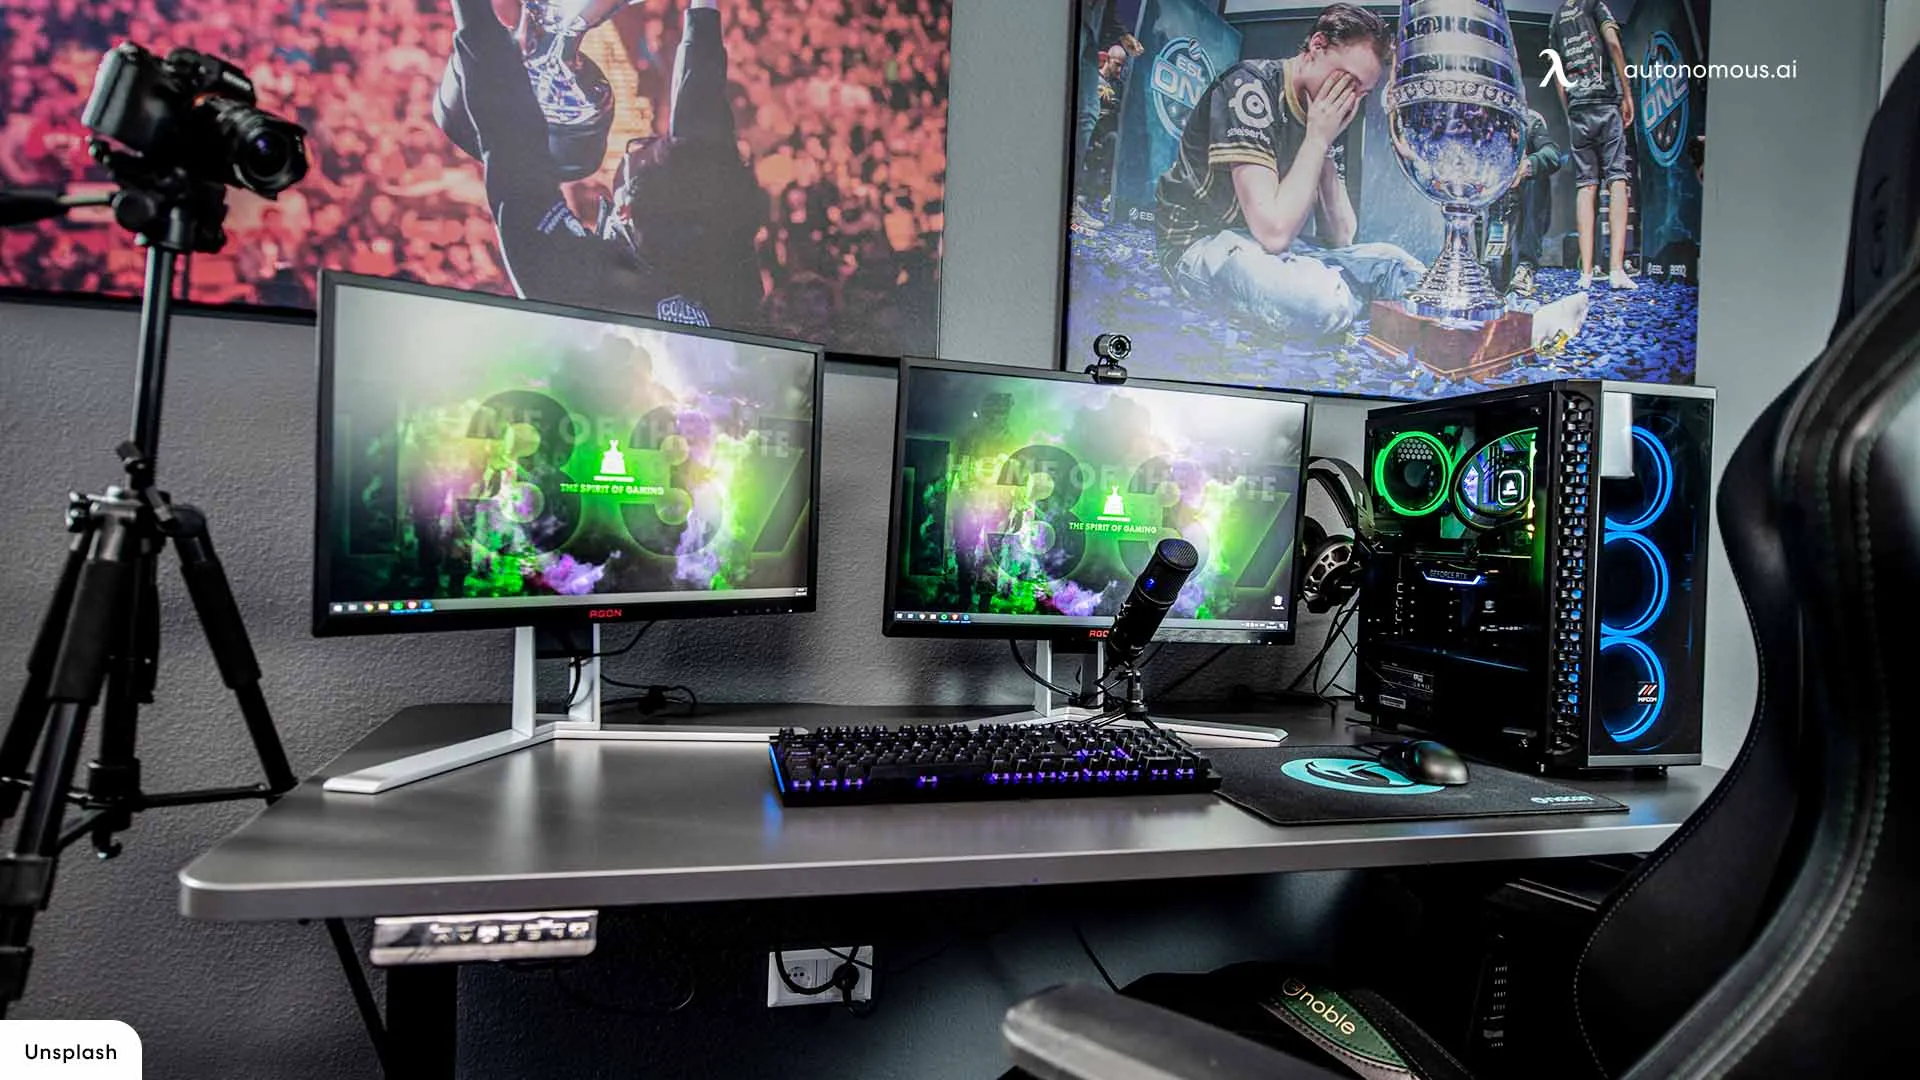 How to Choose a Good Monitor for Streaming?